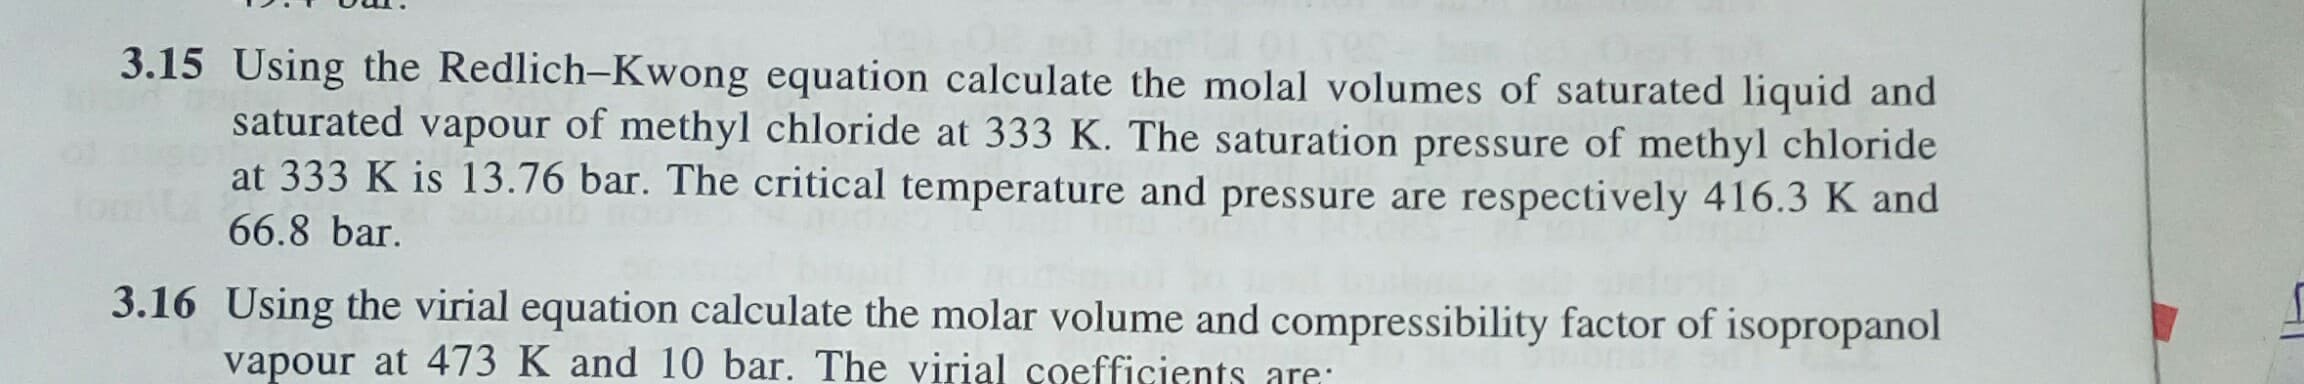 Using the Redlich-Kwong equation calculate the molal volumes of saturated liquid and
saturated vapour of methyl chloride at 333 K. The saturation pressure of methyl chloride
at 333 K is 13.76 bar. The critical temperature and pressure are respectively 416.3 K and
66.8 bar.
